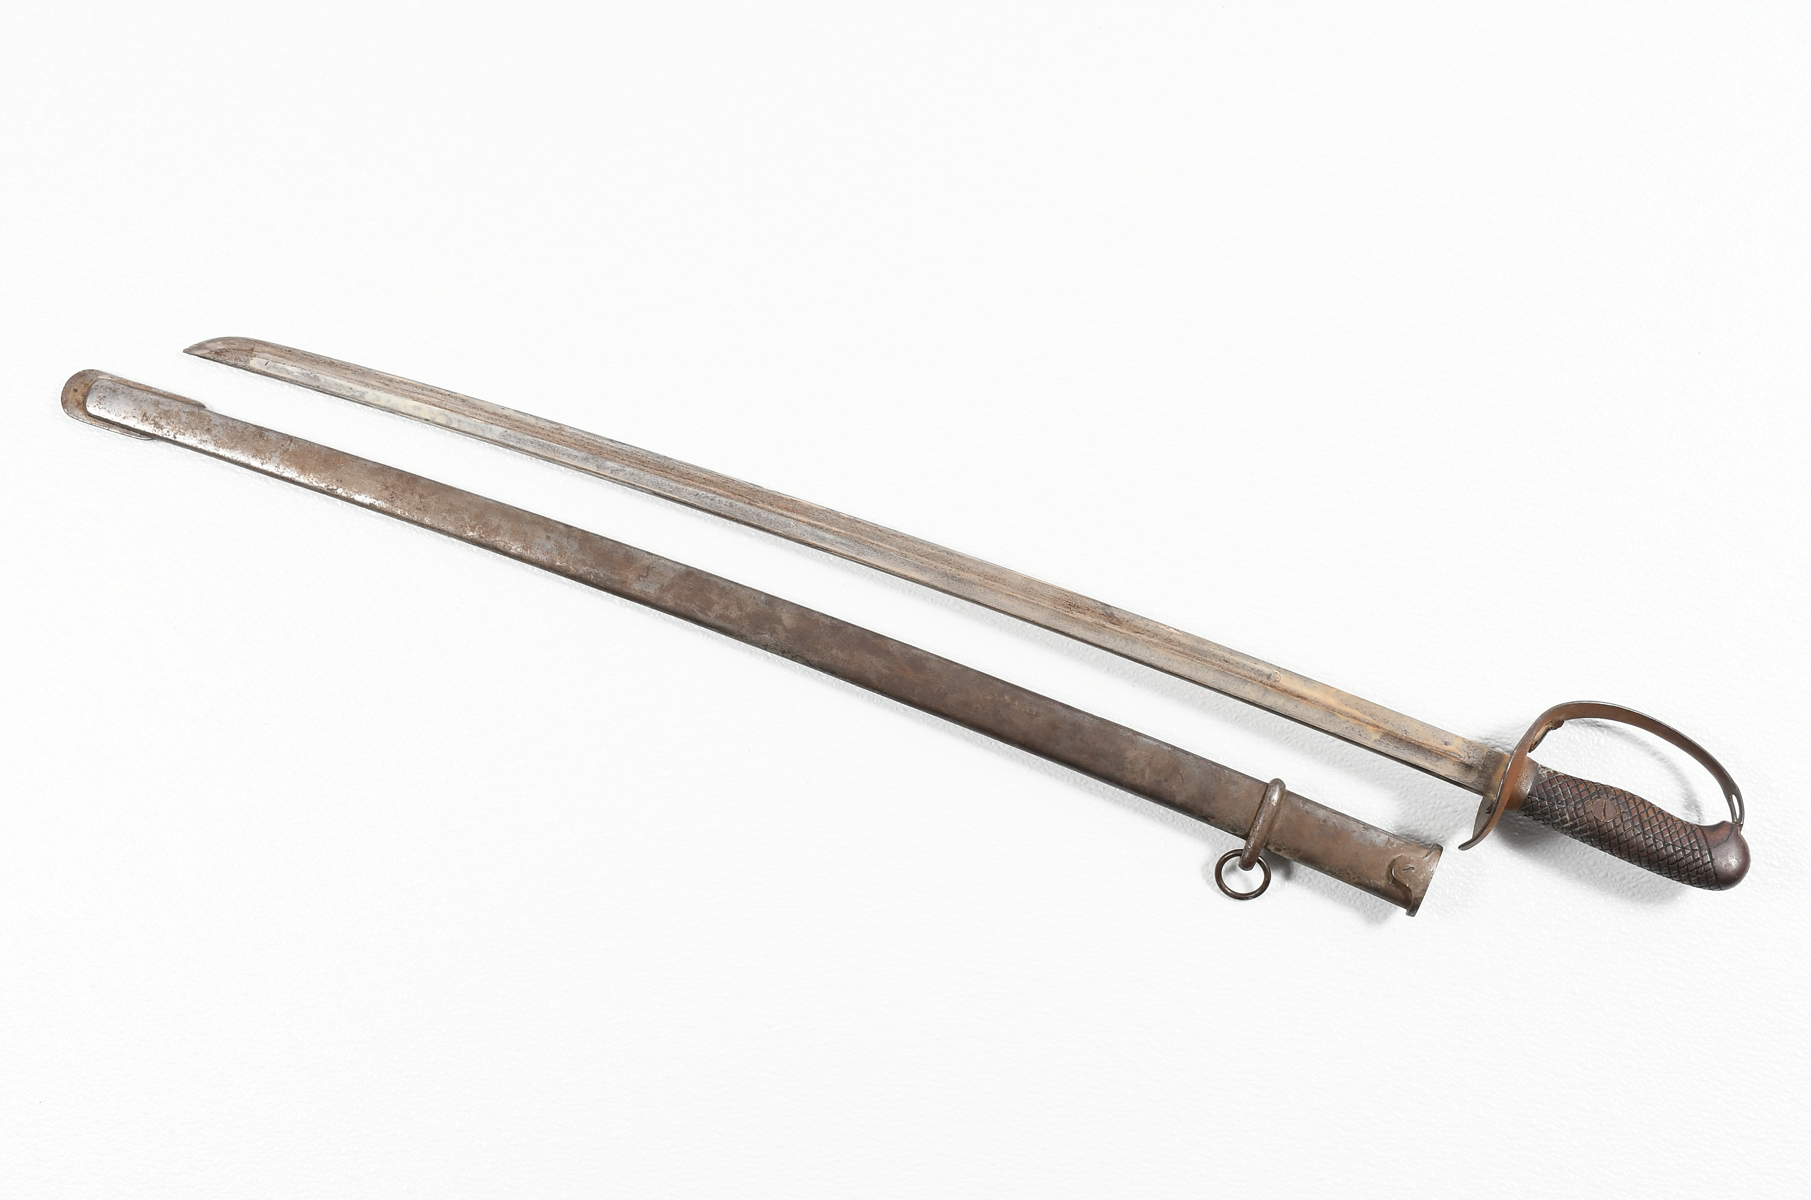 JAPANESE CALVARY SWORD WITH SCABBARD: